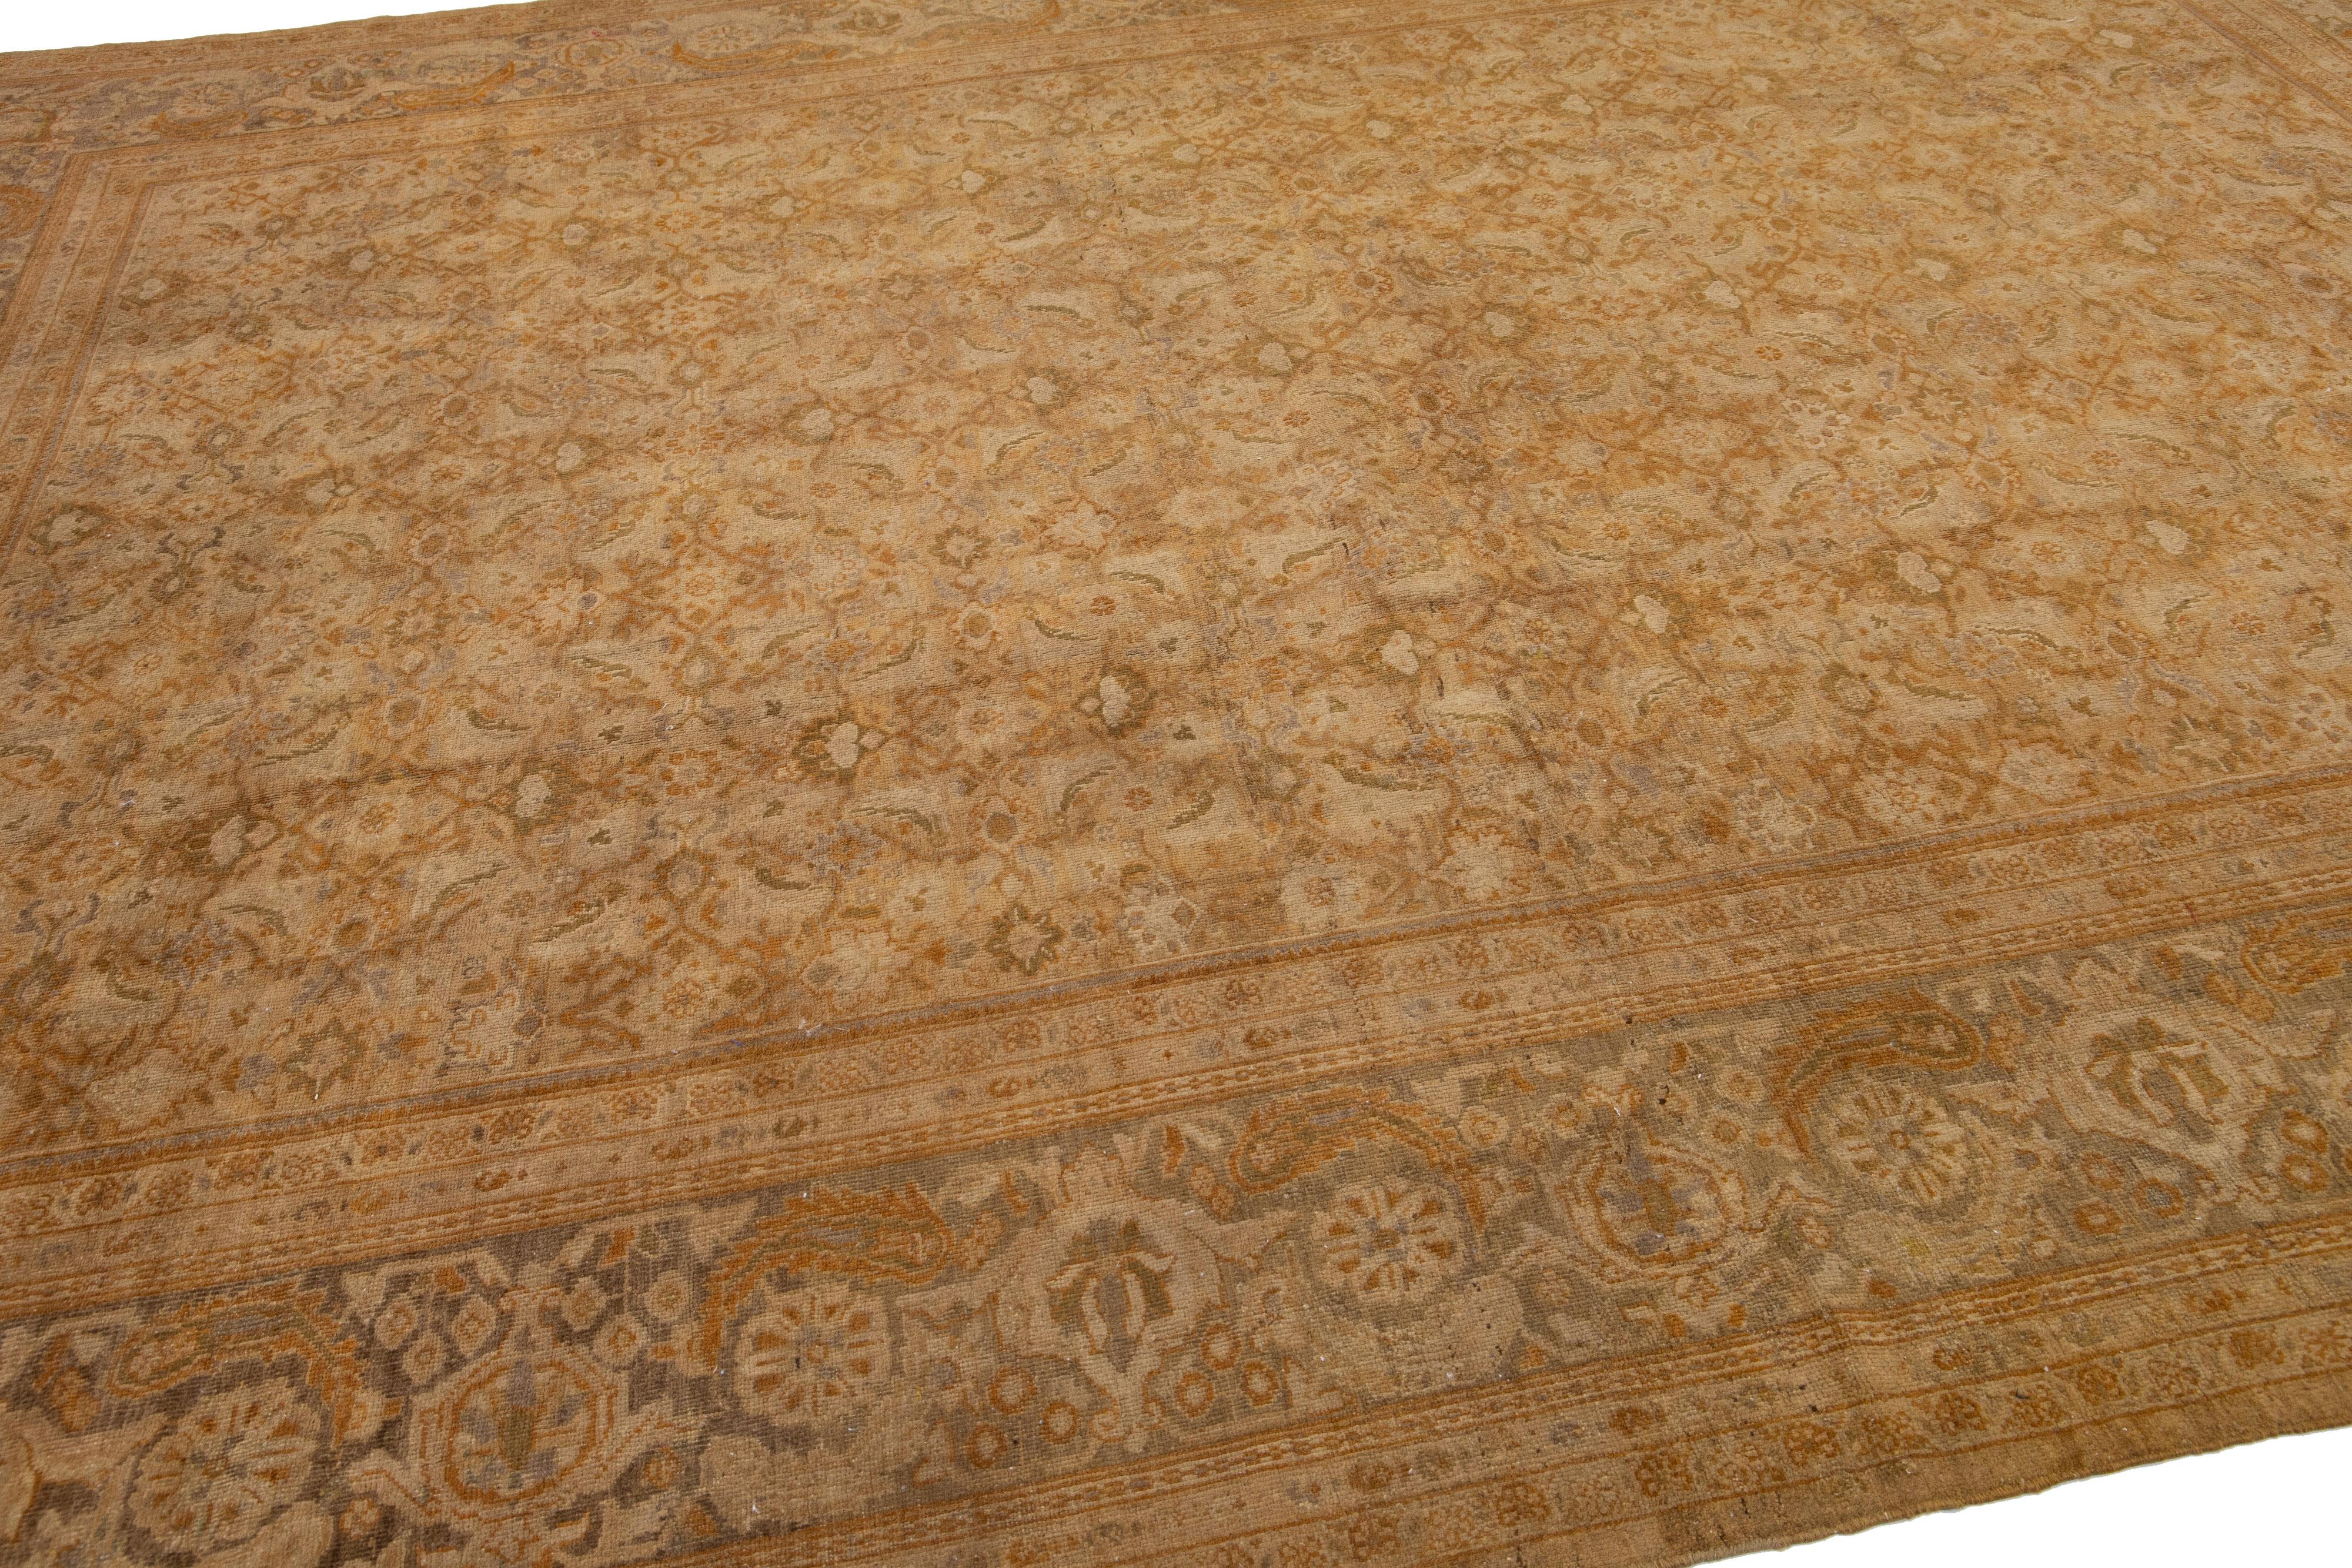 Antique Sultanabad Handmade Tan Wool Rug with Allover Floral Design For Sale 1